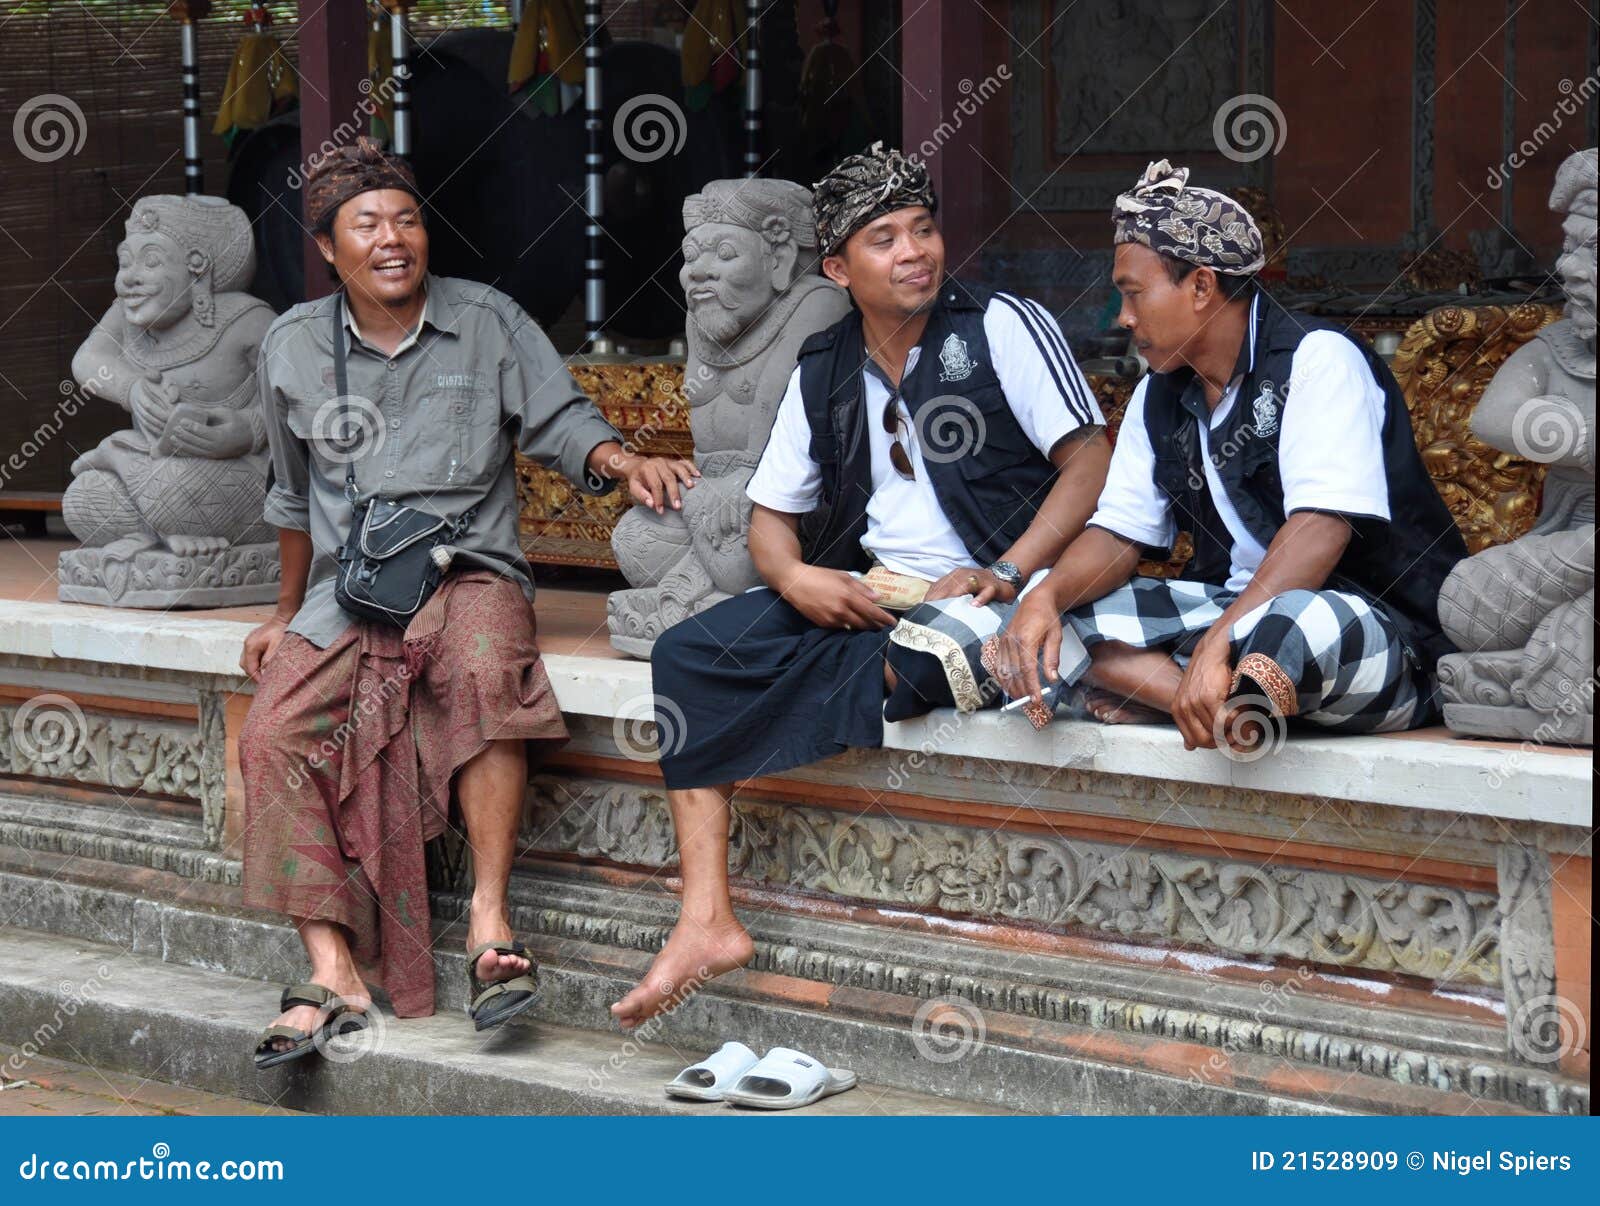 Balinese Men In Traditional Costume Bali Indonesia Editorial Photo 21528909 